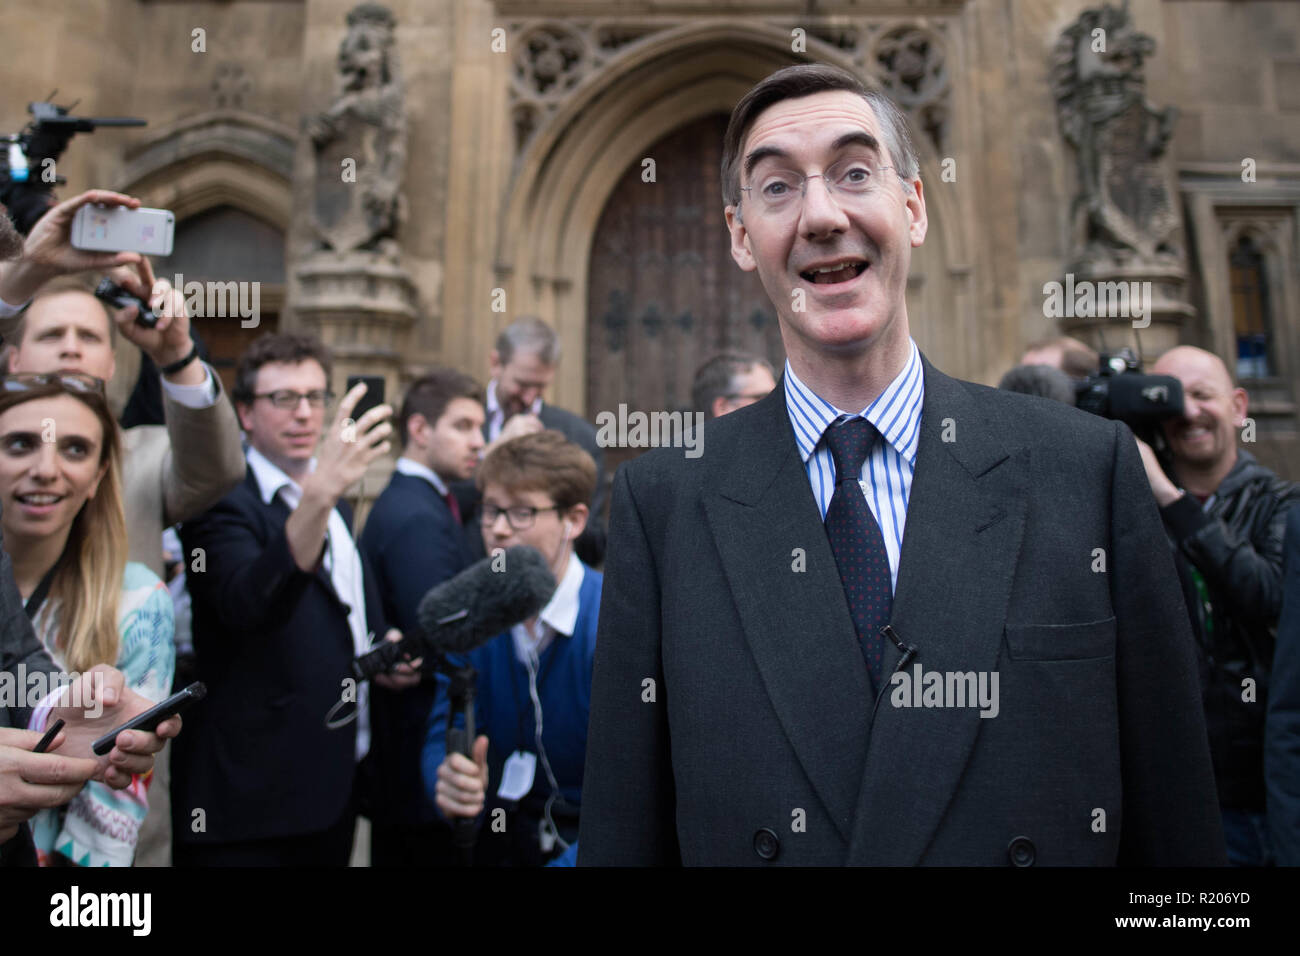 Conservative MP Jacob Rees-Mogg speaking outside the House of Parliament in London after he handed in his letter of no-confidence to Sir Graham Brady, chairman of the 1922 Committee, saying Theresa May&acirc;€™s Brexit deal &acirc;€œhas turned out to be worse than anticipated and fails to meet the promises given to the nation by the Prime Minister&acirc;€. Stock Photo